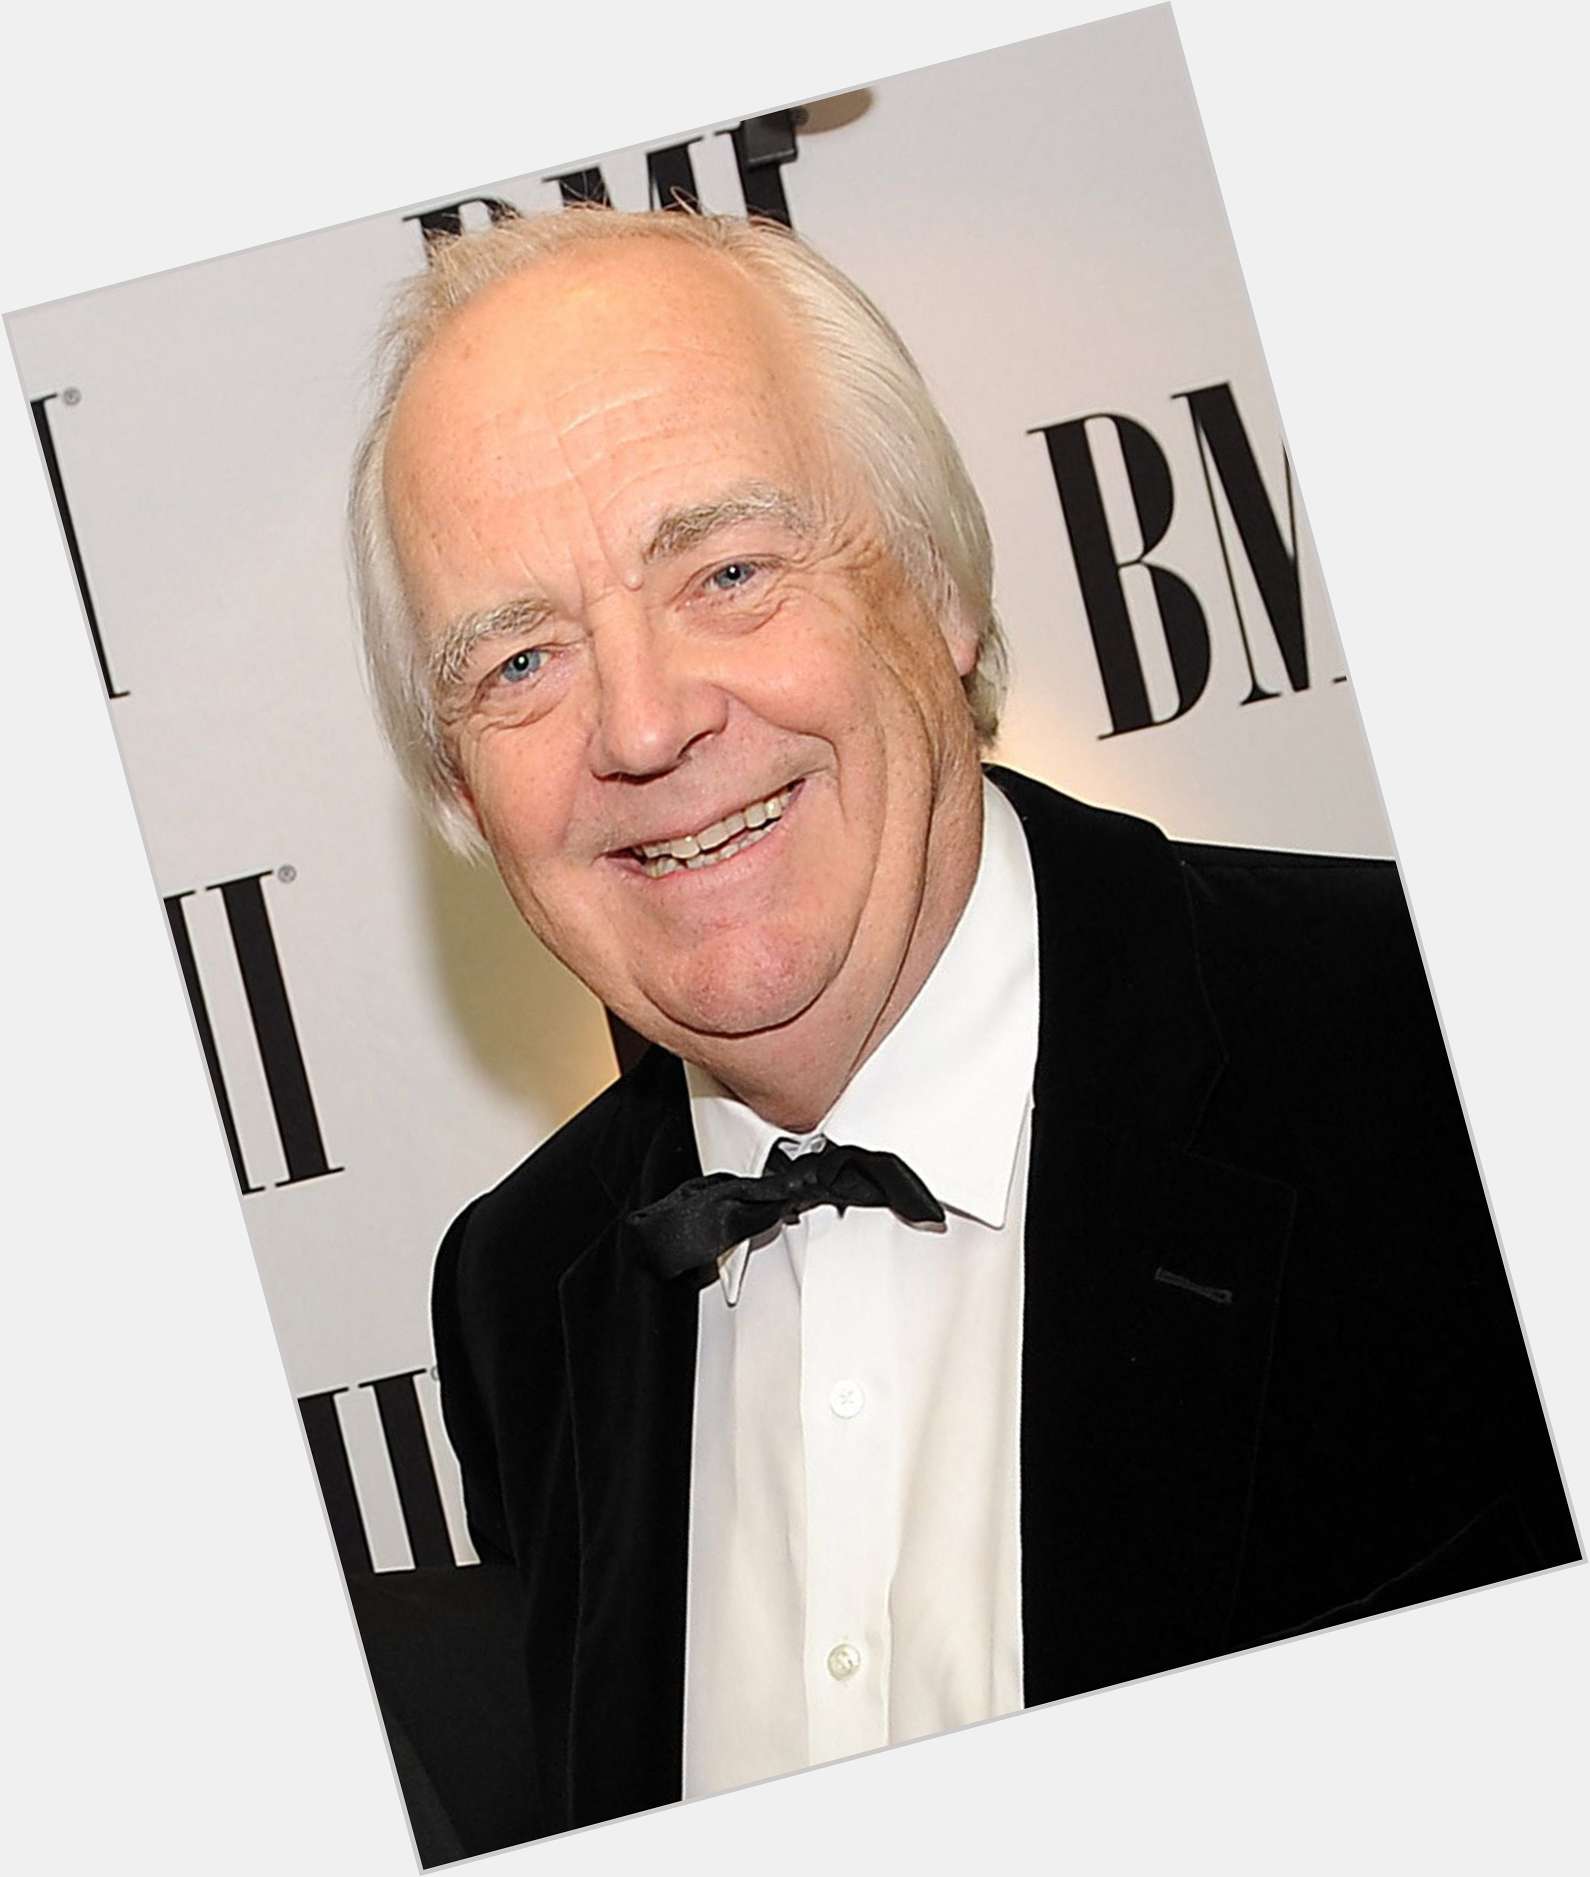 <a href="/hot-men/tim-rice/is-he-oxley-divorce-married-atheist-religious-much">Tim Rice</a>  